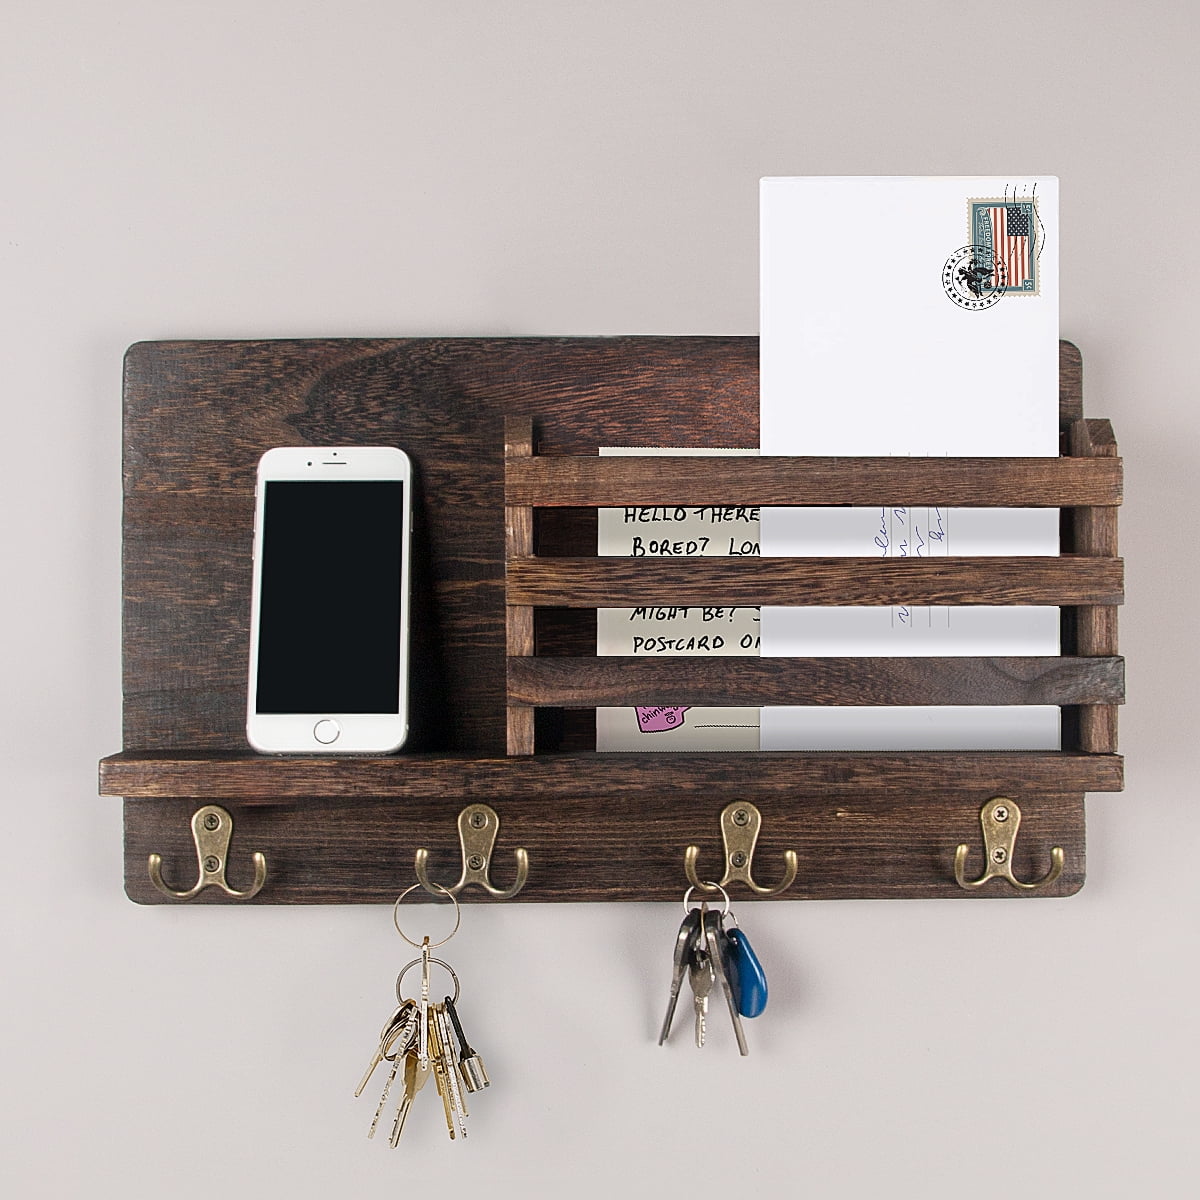 Office,Hallway VICKERT Wooden Wall Mounted Mail Holder,Wooden Mail Sorter Organizer,Wood Key Holder Organizer with 4 Double Key Hooks and a Floating Shelf,for Entryroom Kitchen 